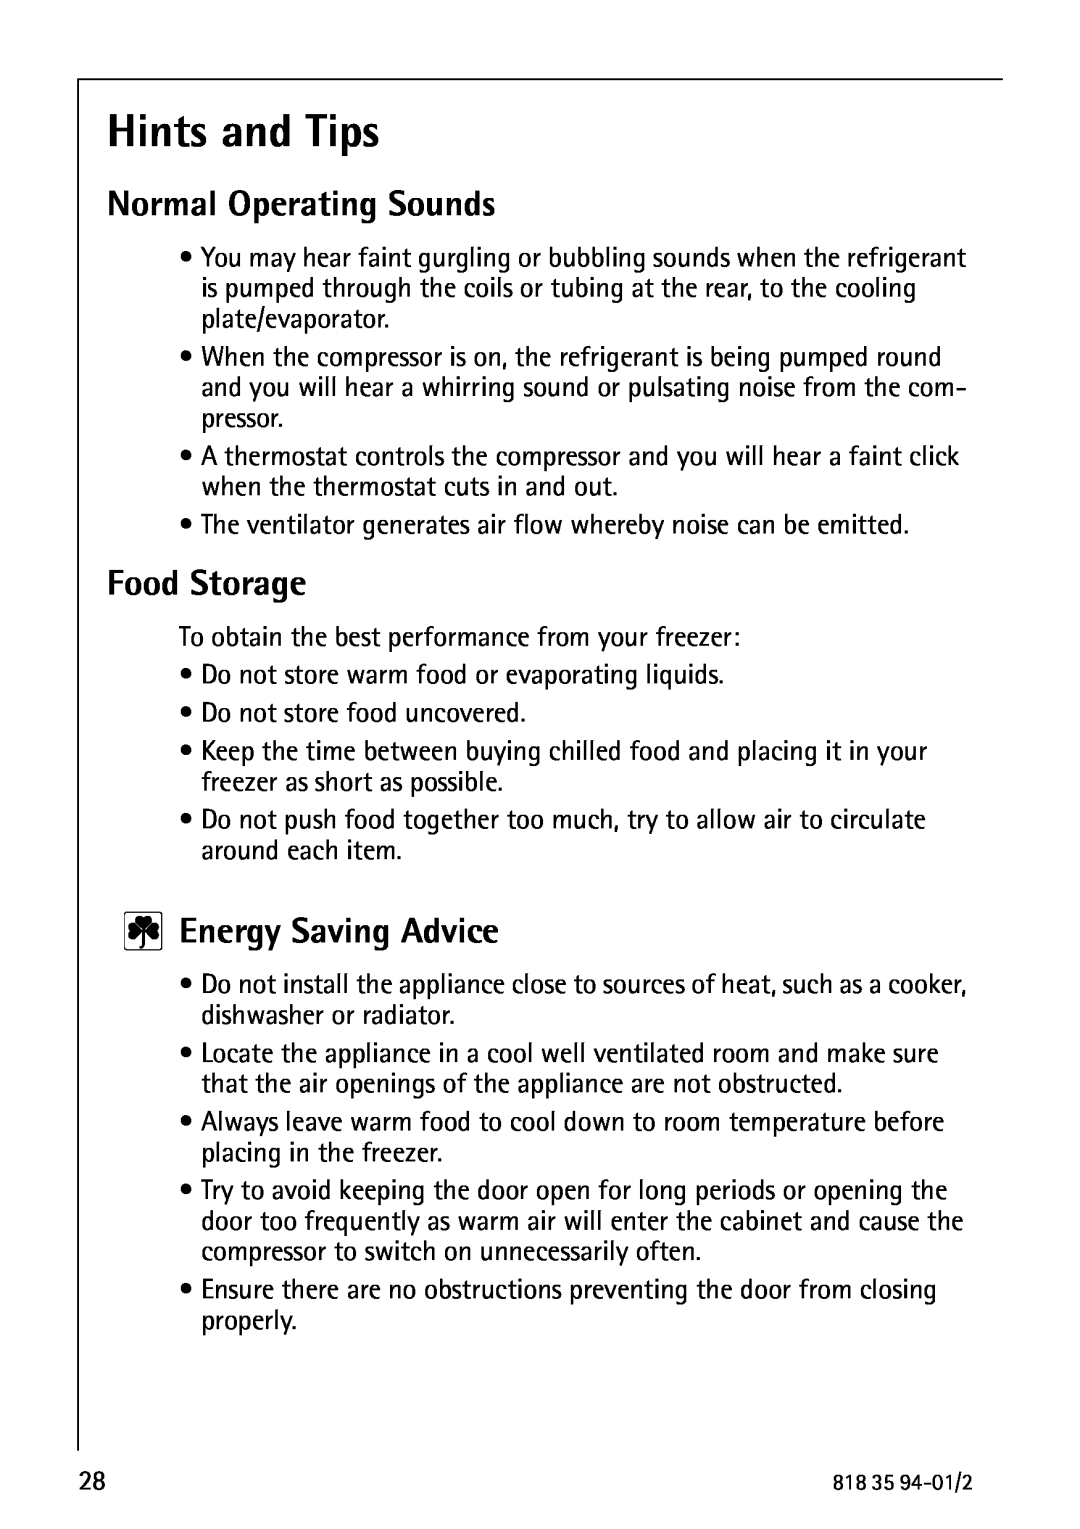 Electrolux U31462 operating instructions Hints and Tips, Normal Operating Sounds, Food Storage, Energy Saving Advice 